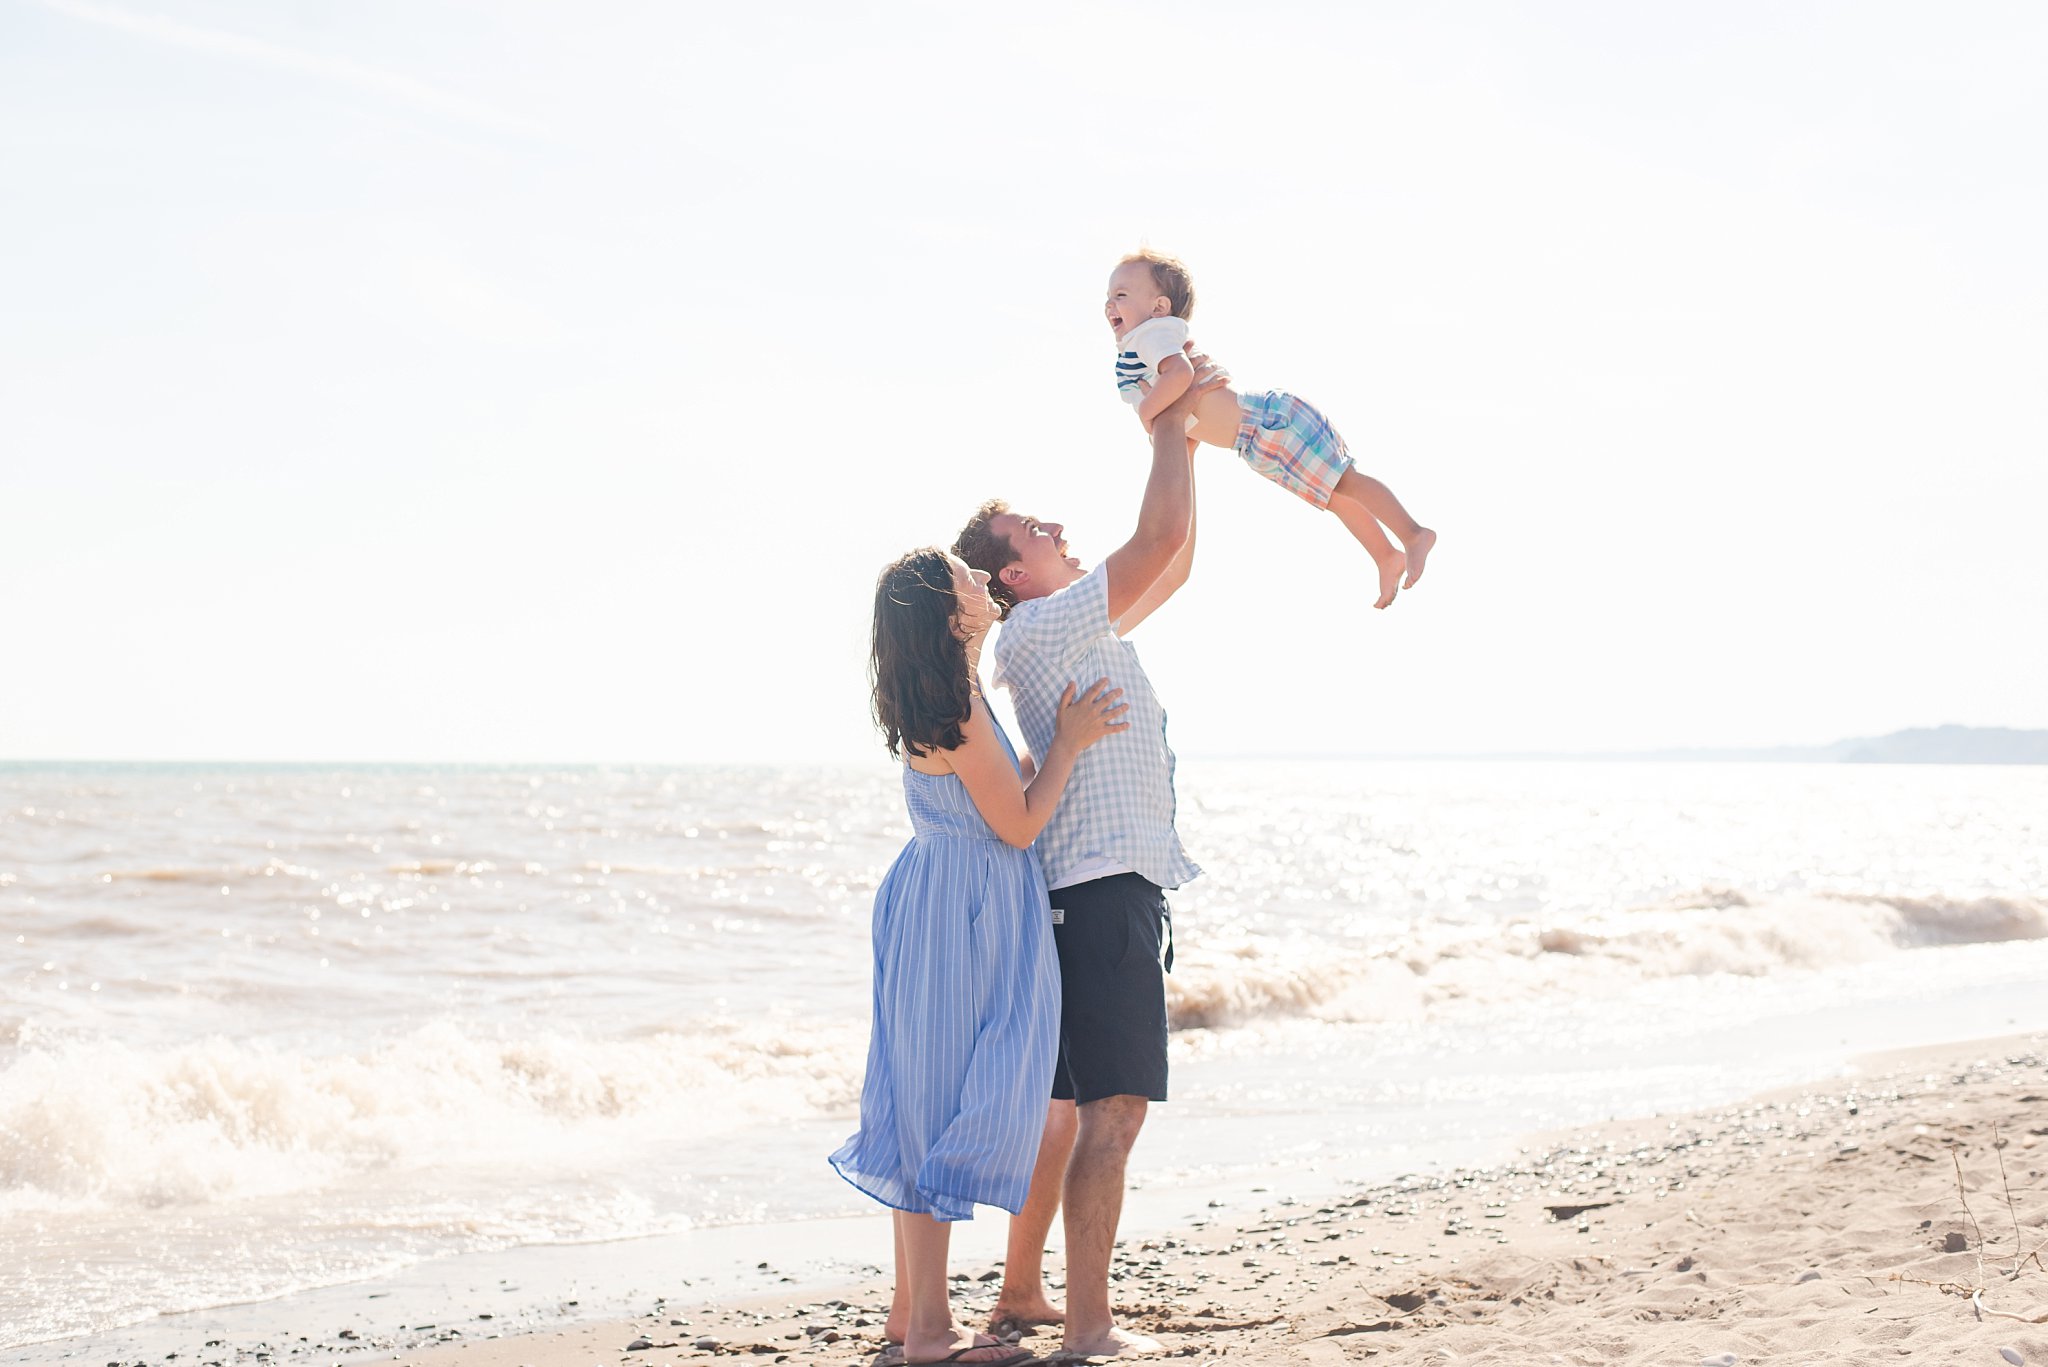 family photography london ontario. a woman in a blue dress stands behind a man in a white and blue shirt and blue shorts. he is lifting their son high into the air. the boy is wearing a white shirt and multicoloured plaid pants. there is sun shining off waves splashing behind them.